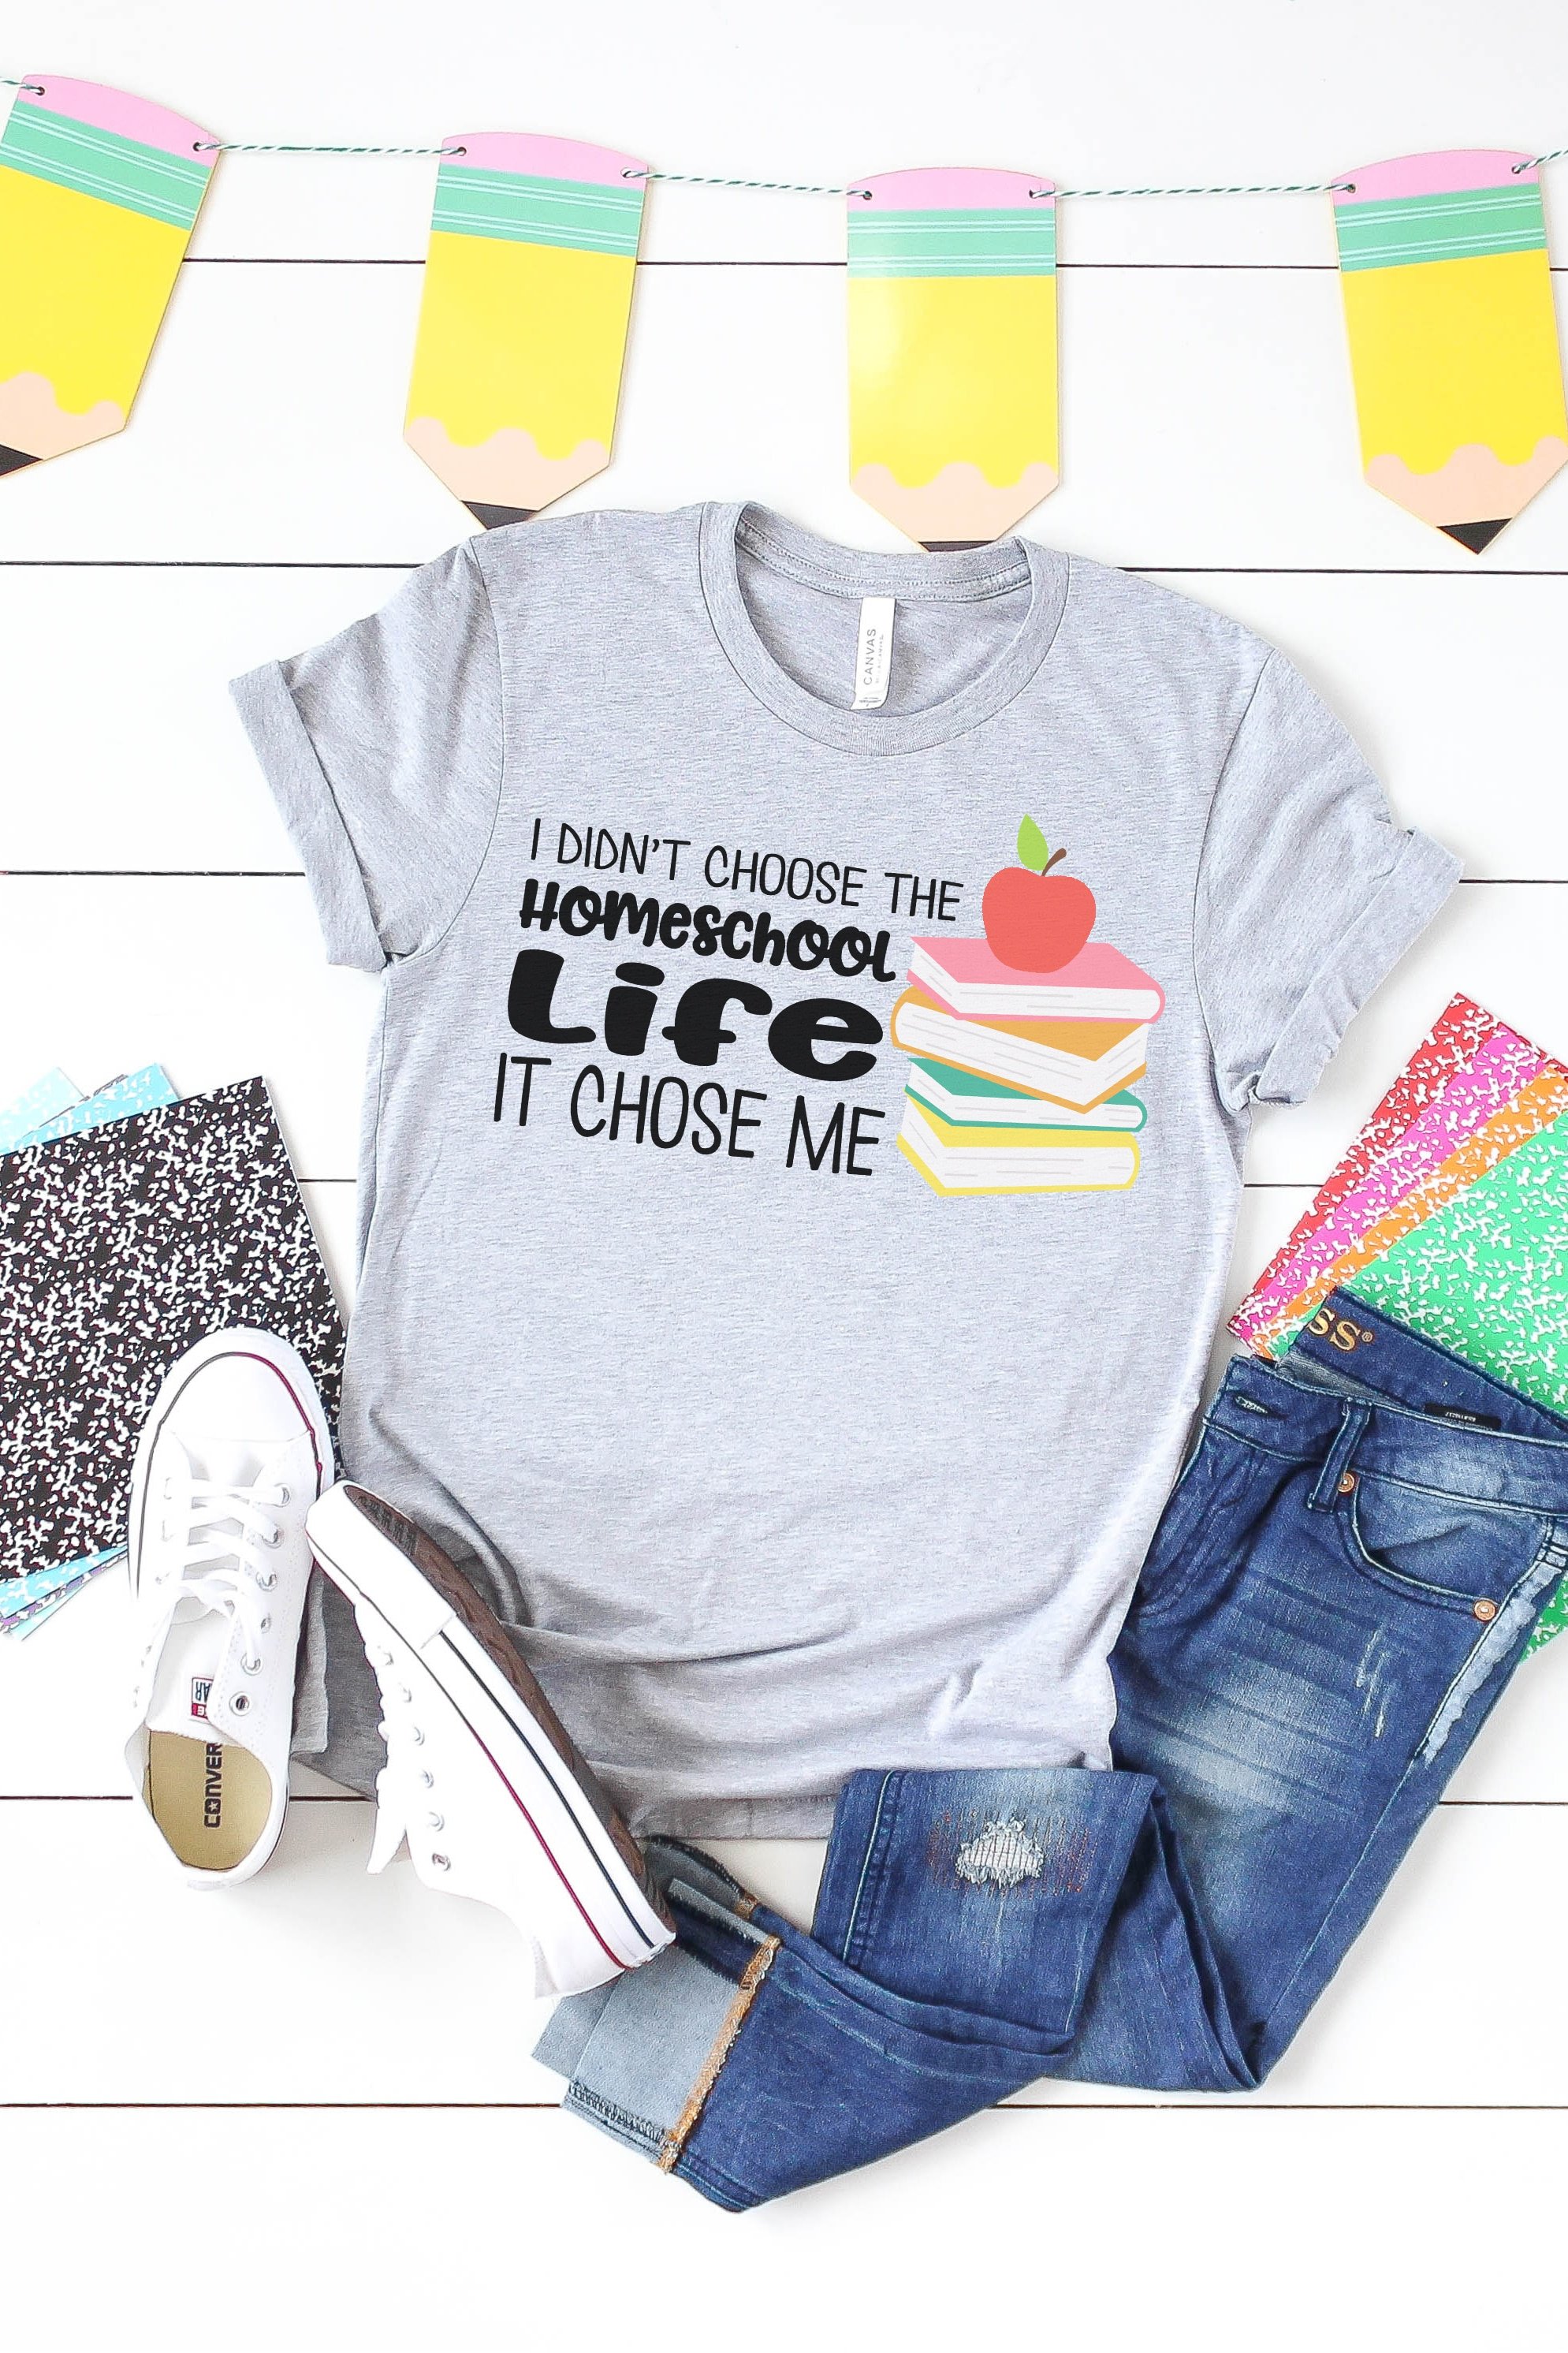 homeschool life svg file on grey shirt with accessories